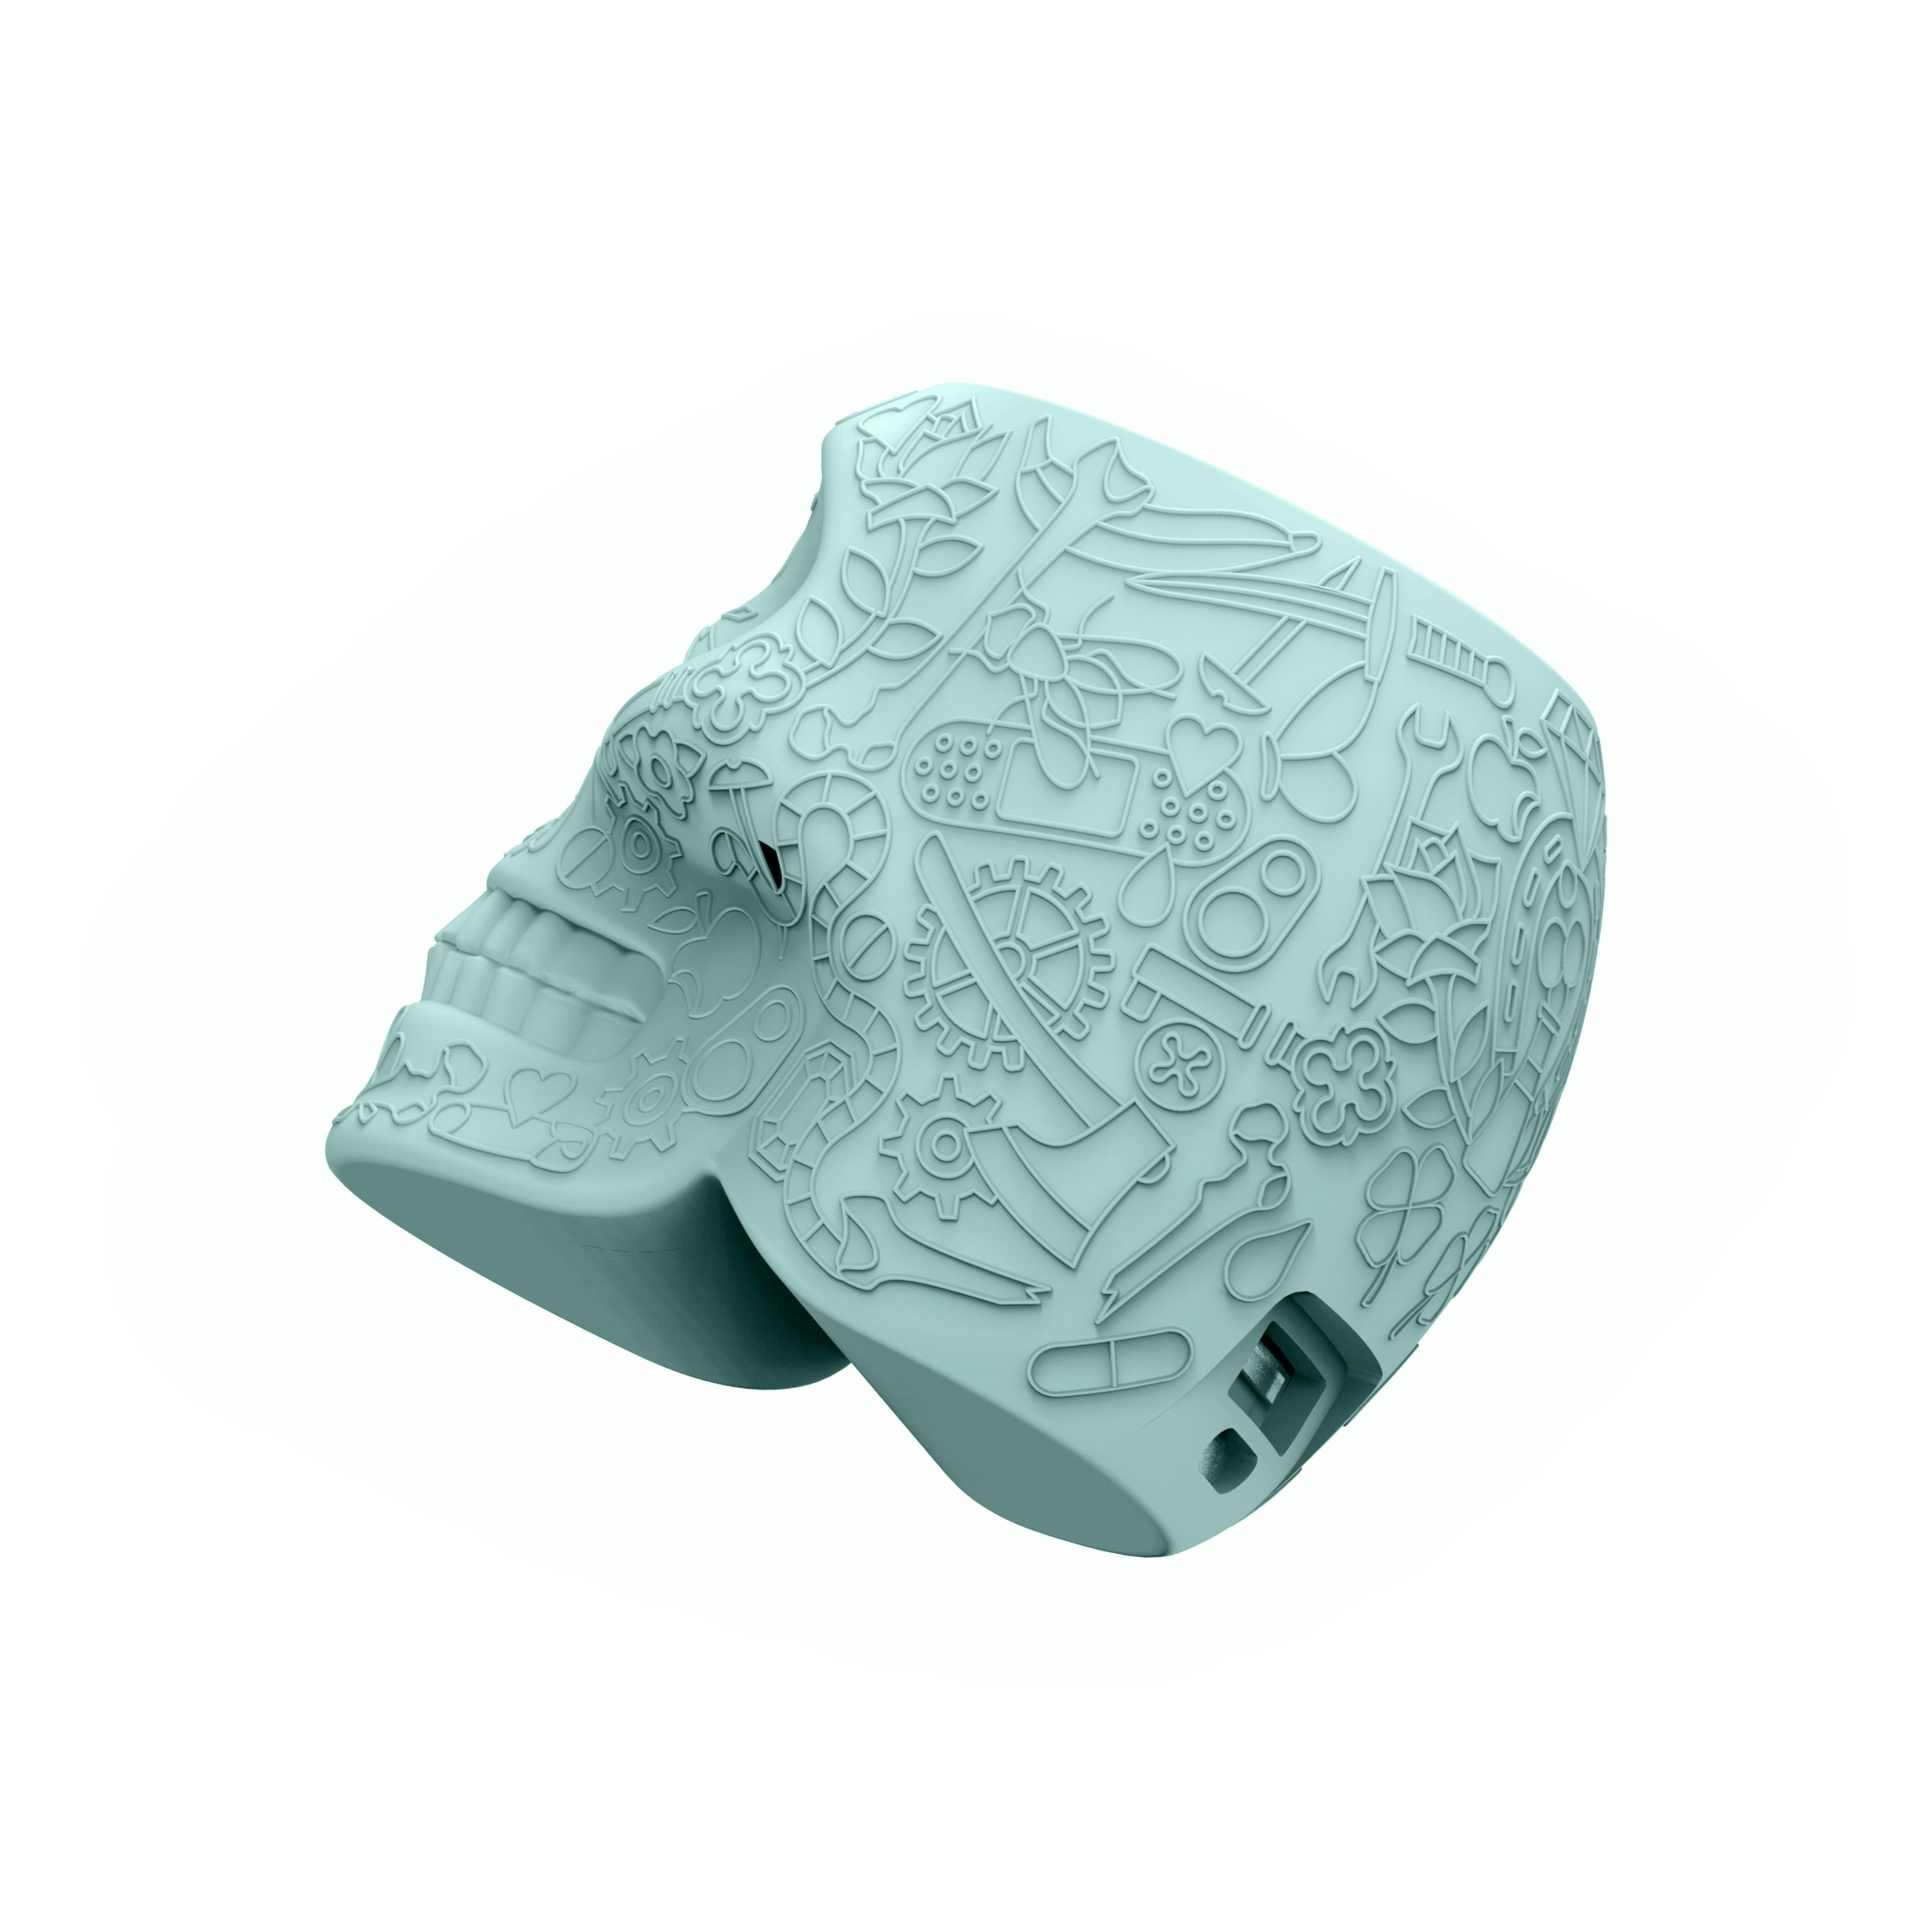 Modern In Stock in Los Angeles, Light Blue Mexico Skull Mini Portable Charger For Sale